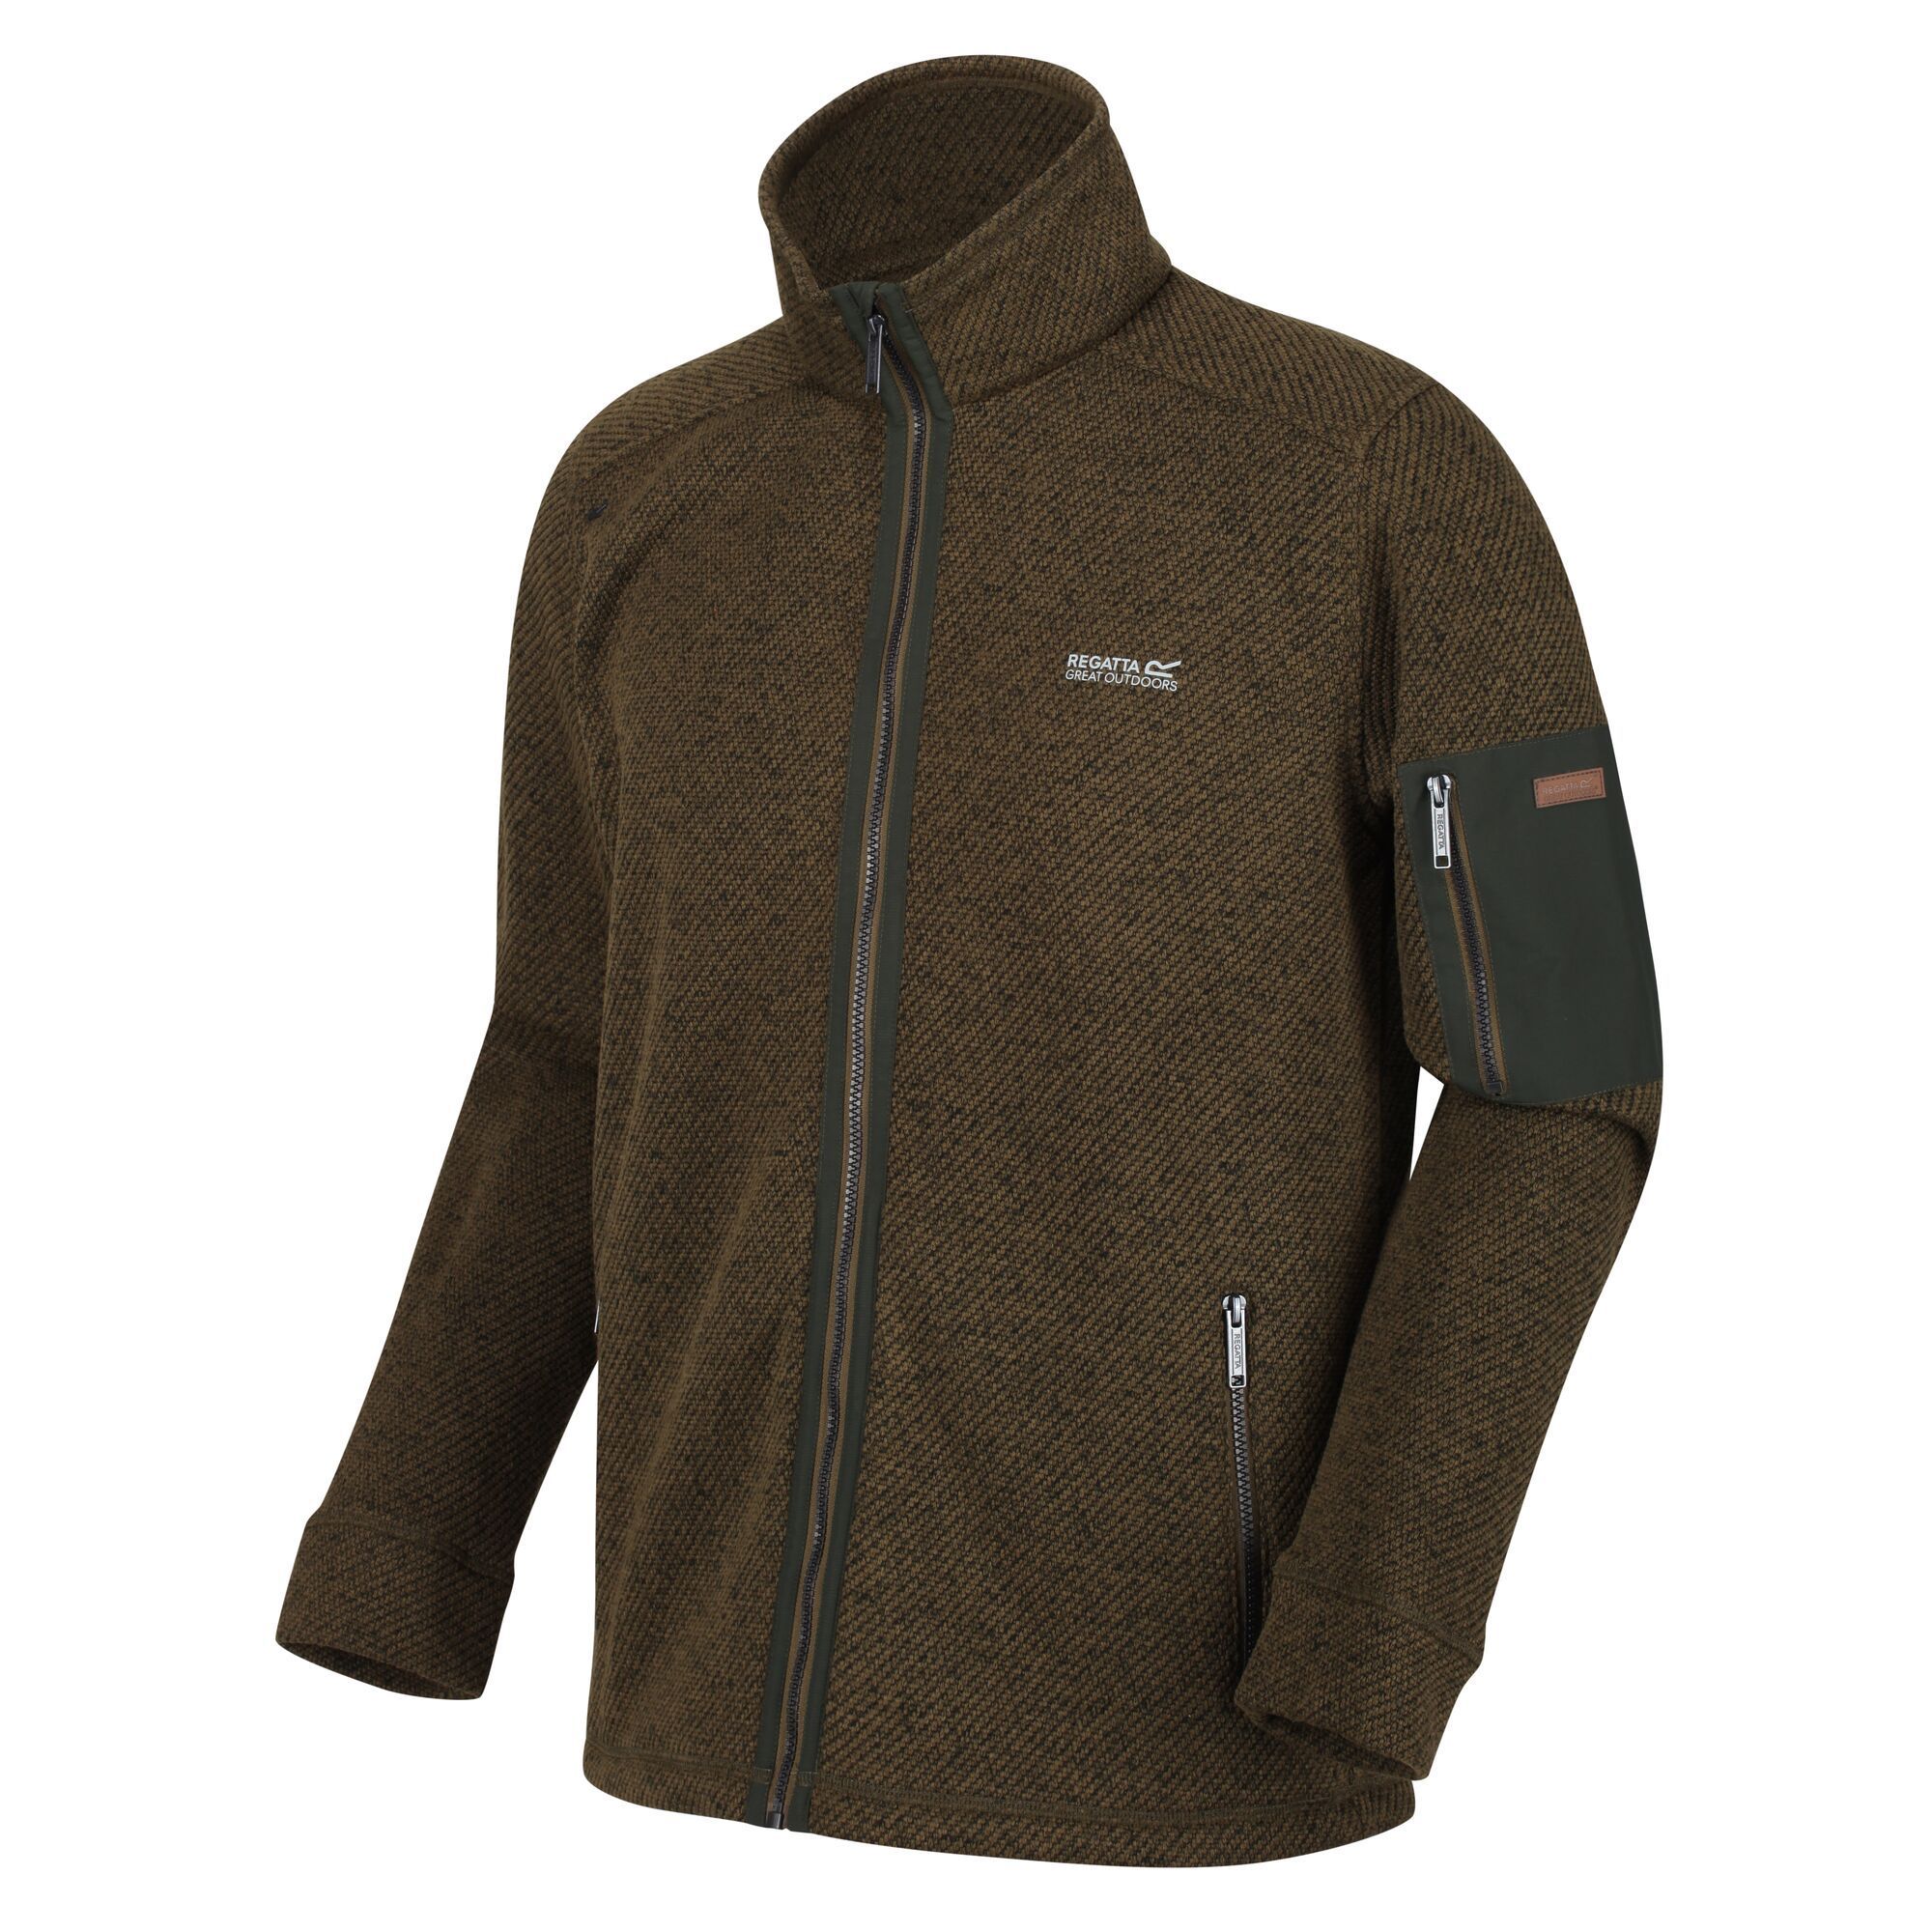 Material: 100% Polyester 245gsm diagonal knit effect fabric. Warm, soft and lightweight fleece with sleeve pocket. 2 lower zipped pockets. Breeze-blocking stand collar. Regatta outdoors logo badge on left sleeve.